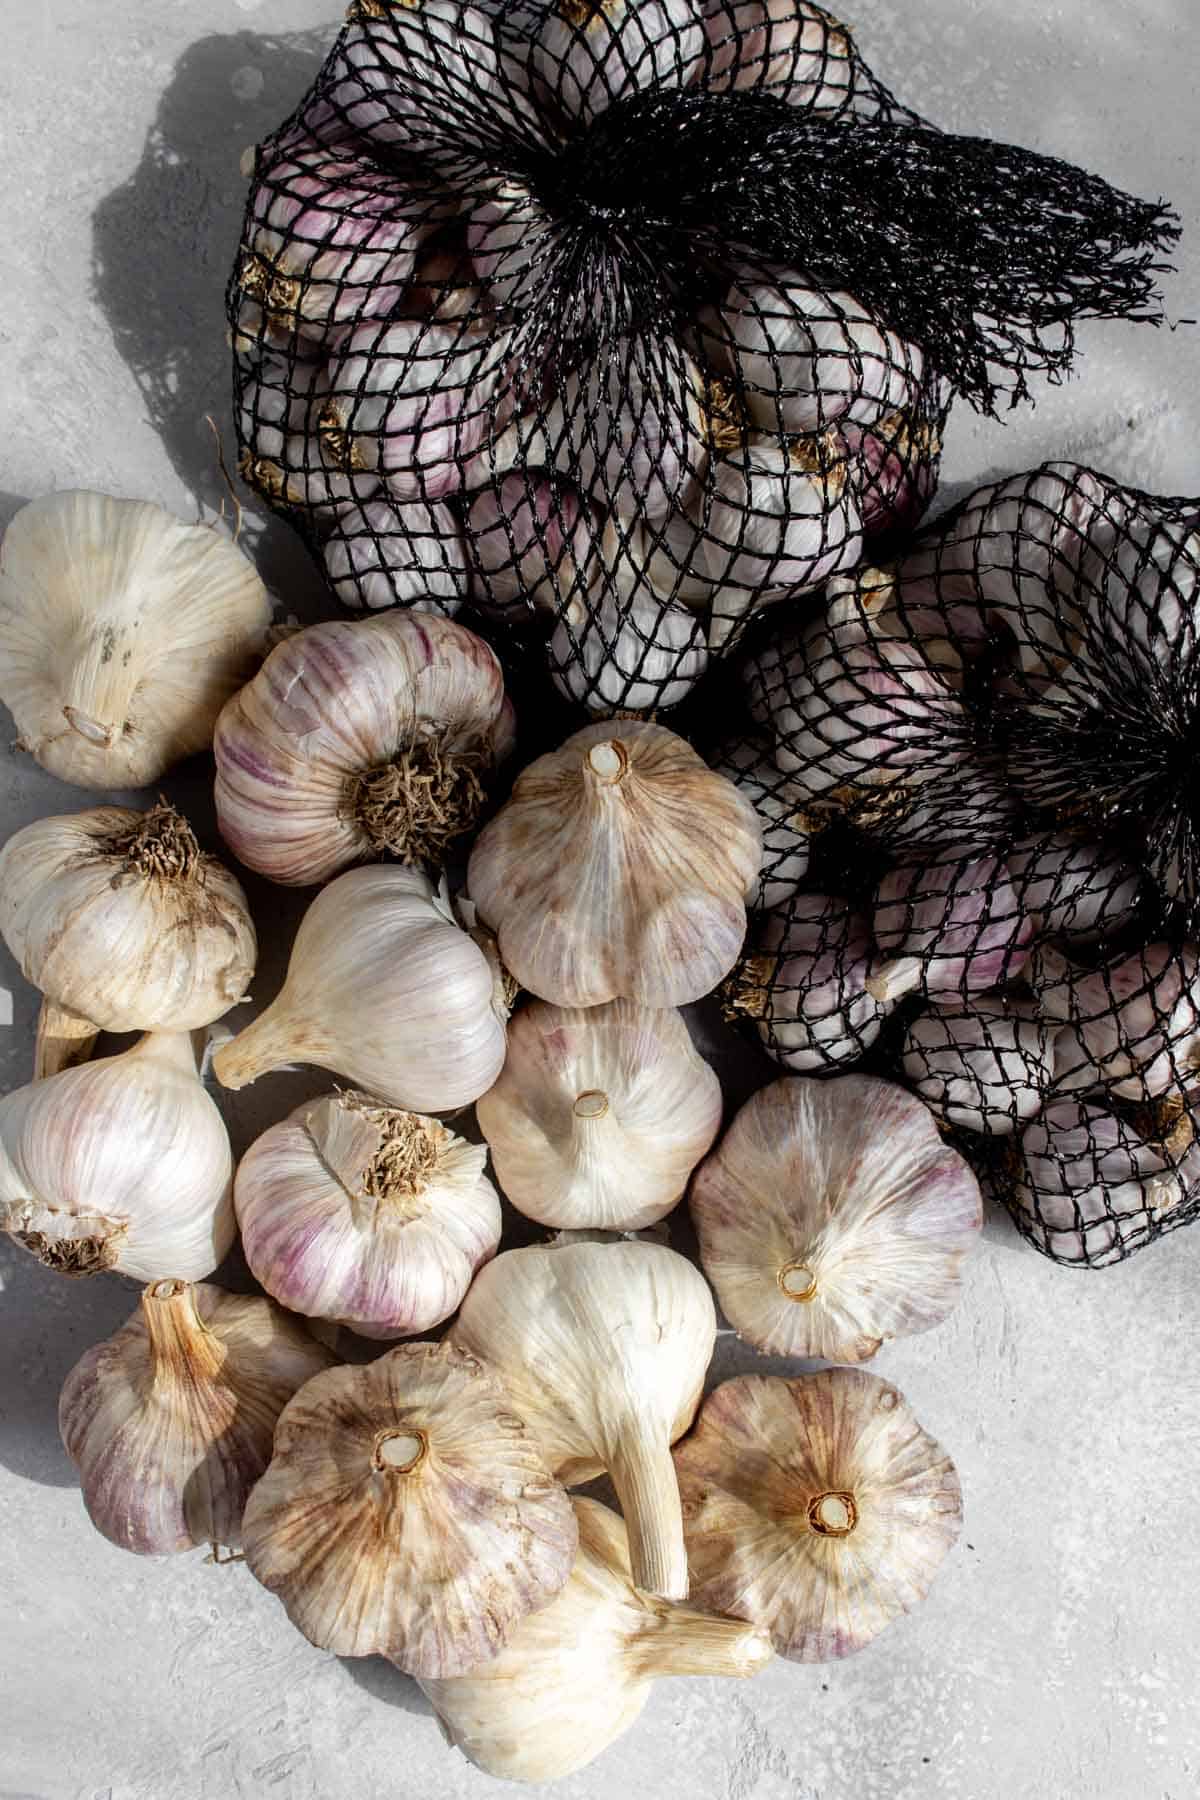 Multiple garlic in a pile, some in a bag.